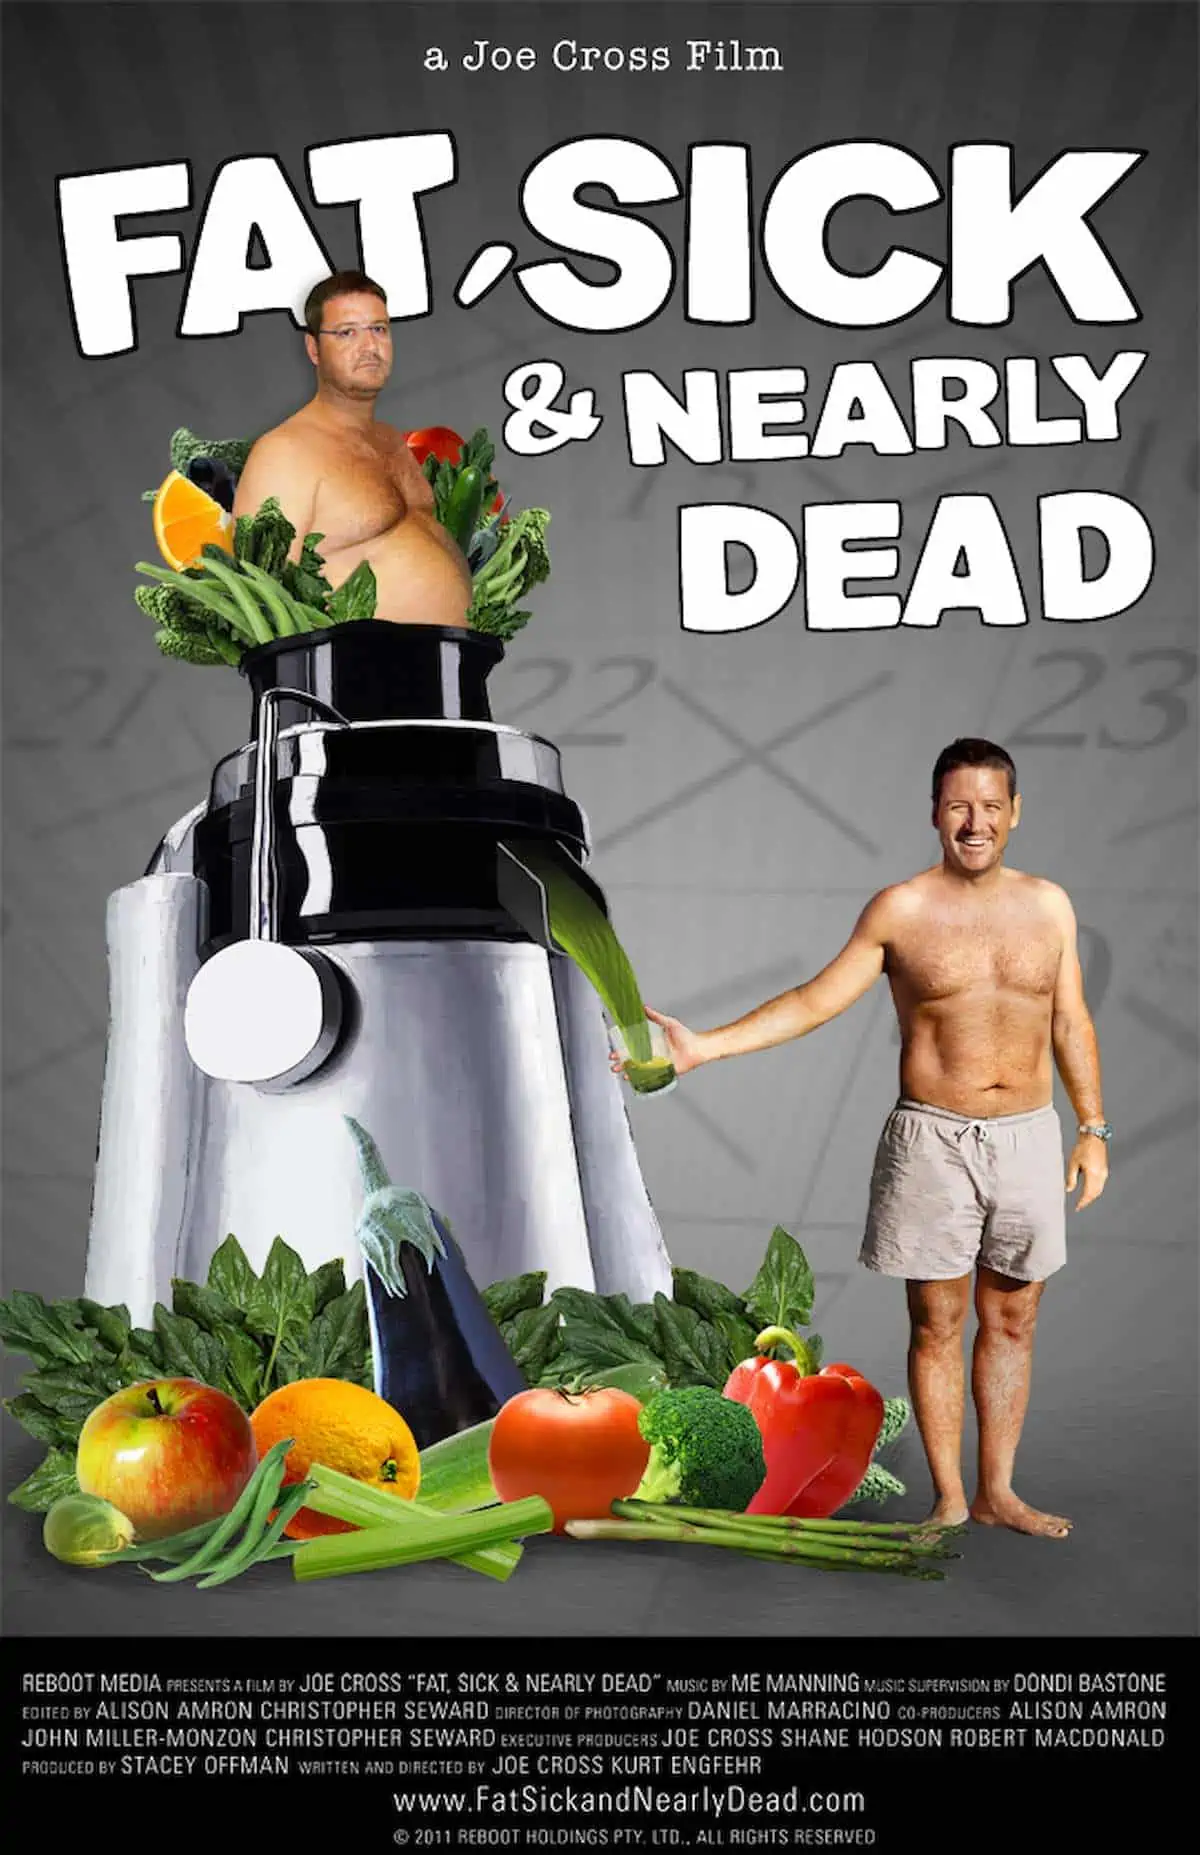 Movie poster for the juicing documentary Fat, Sick, & Nearly Dead.